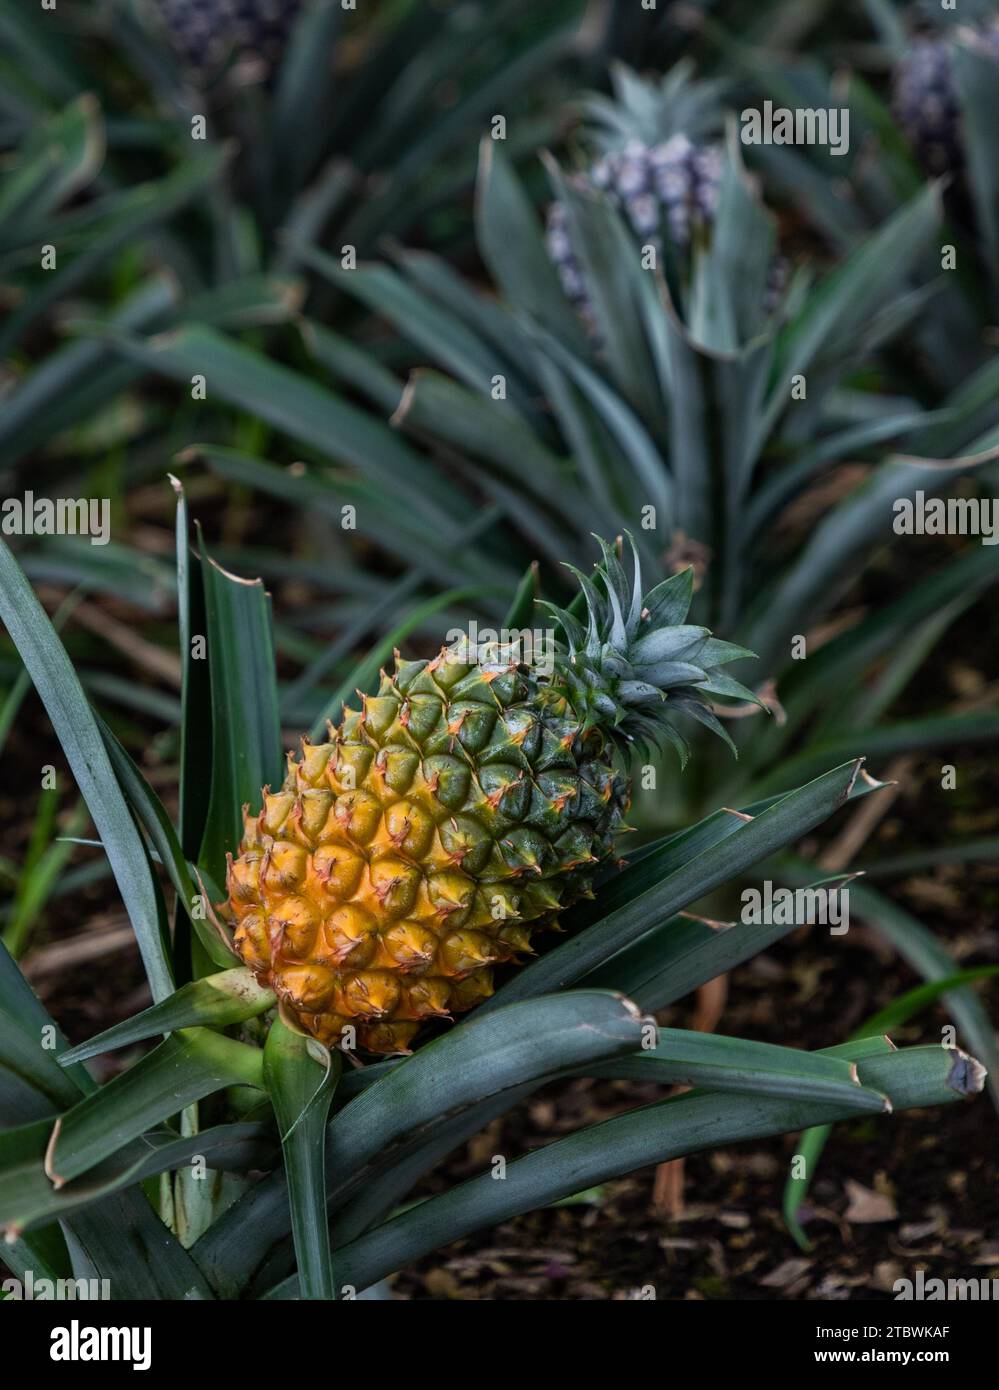 A picture of a pineapple inside of a plantation Stock Photo